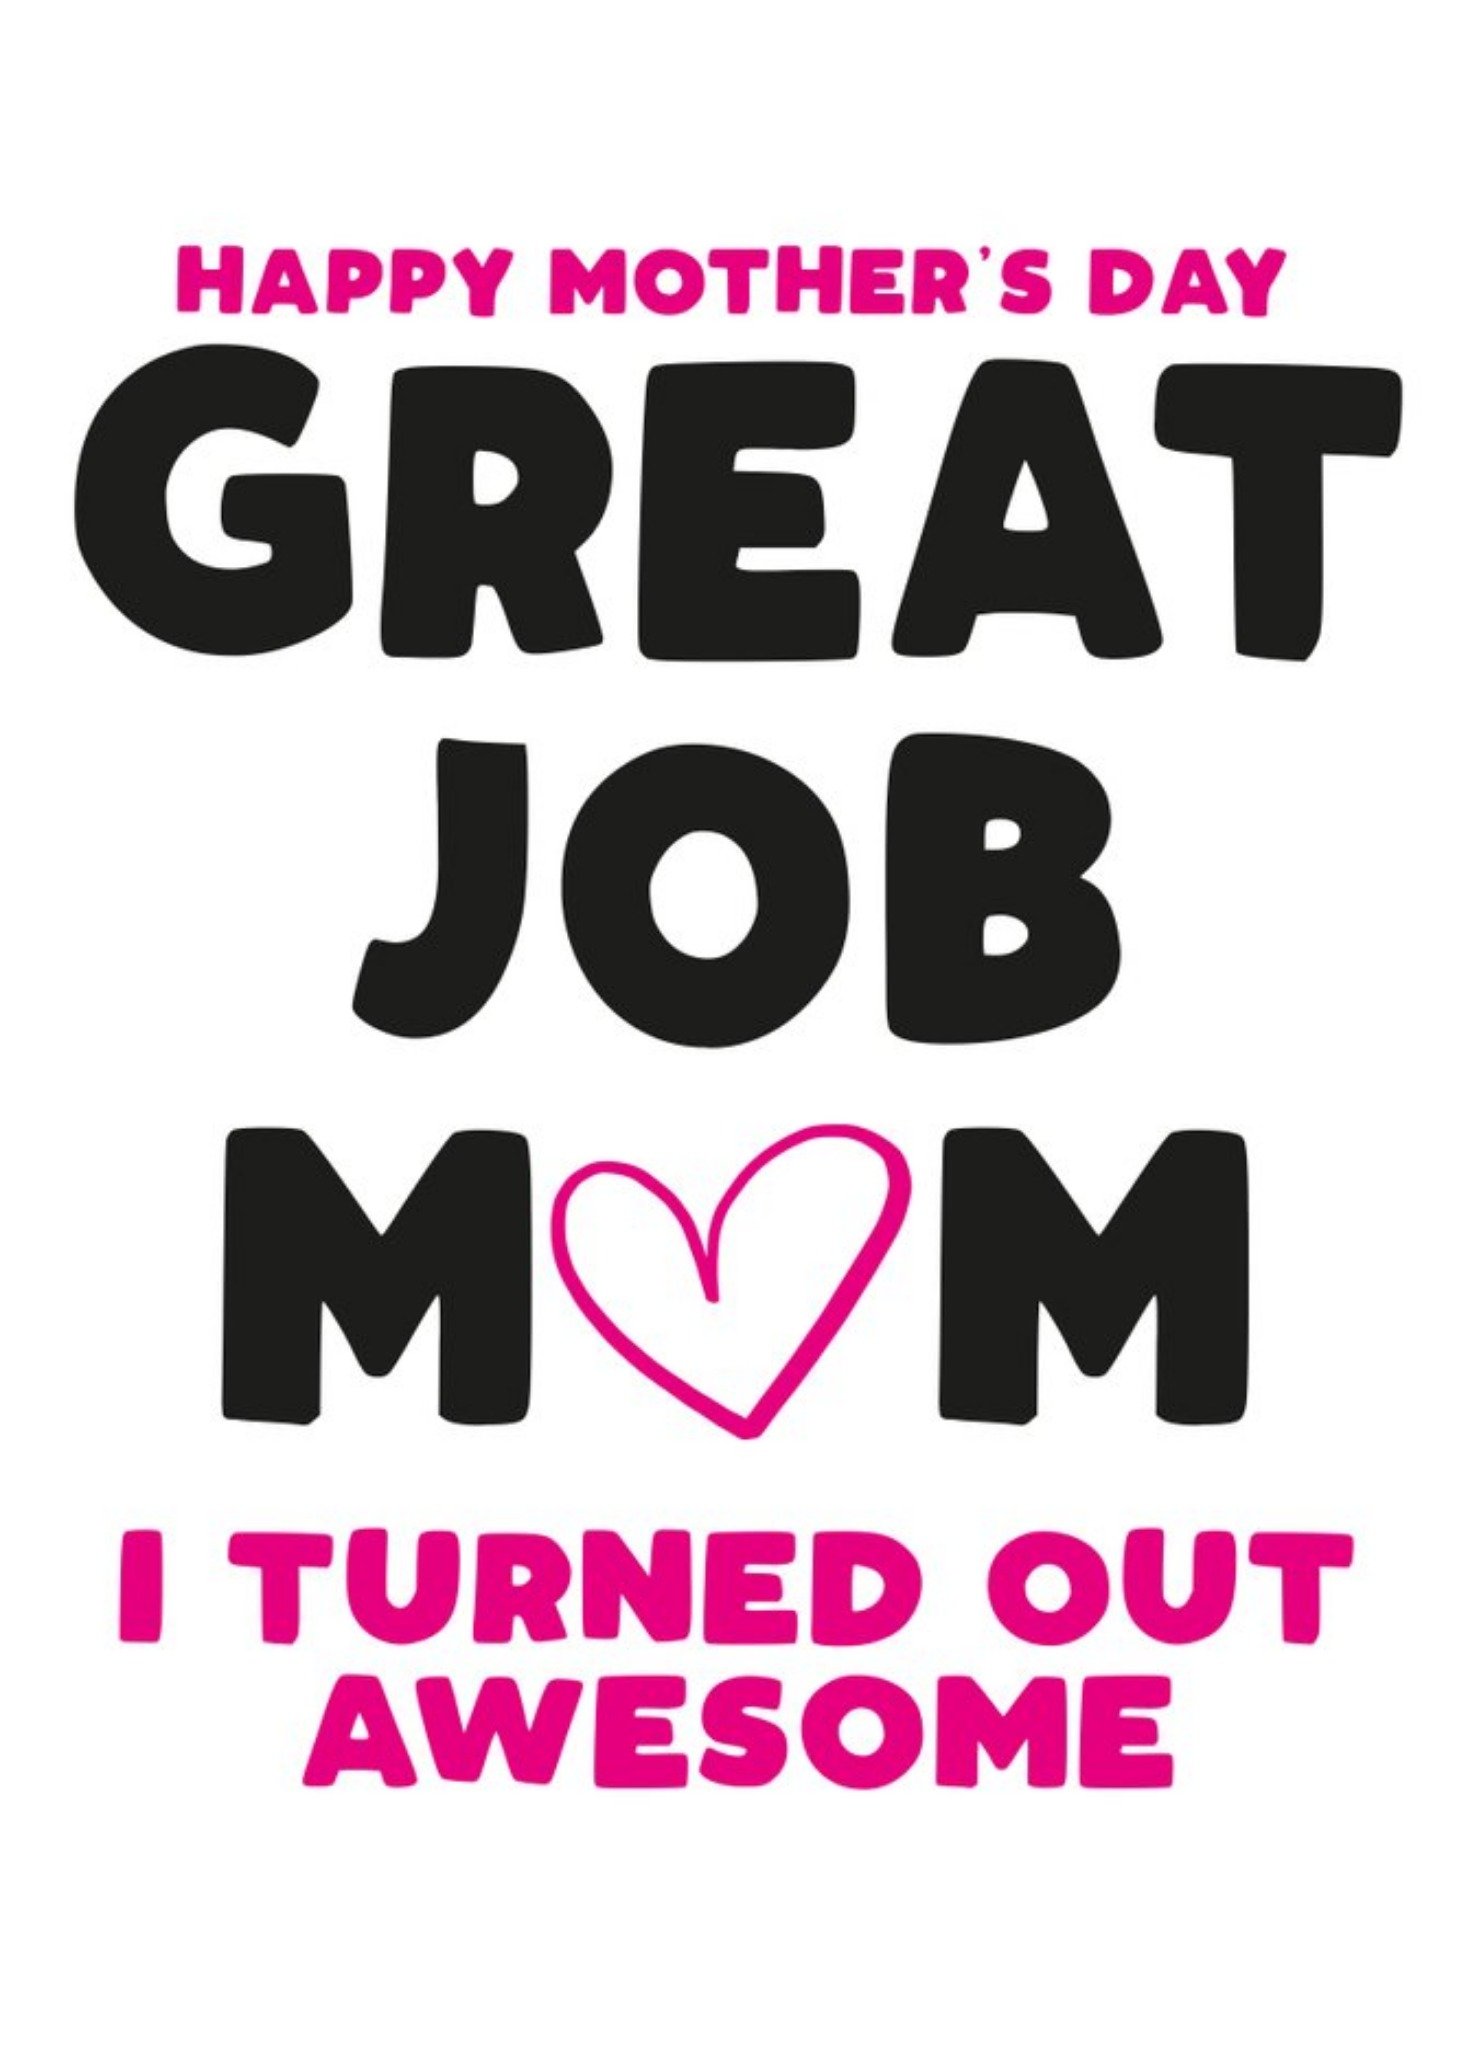 Moonpig Humourous Black And Pink Typography On A White Background Mother's Day Card Ecard